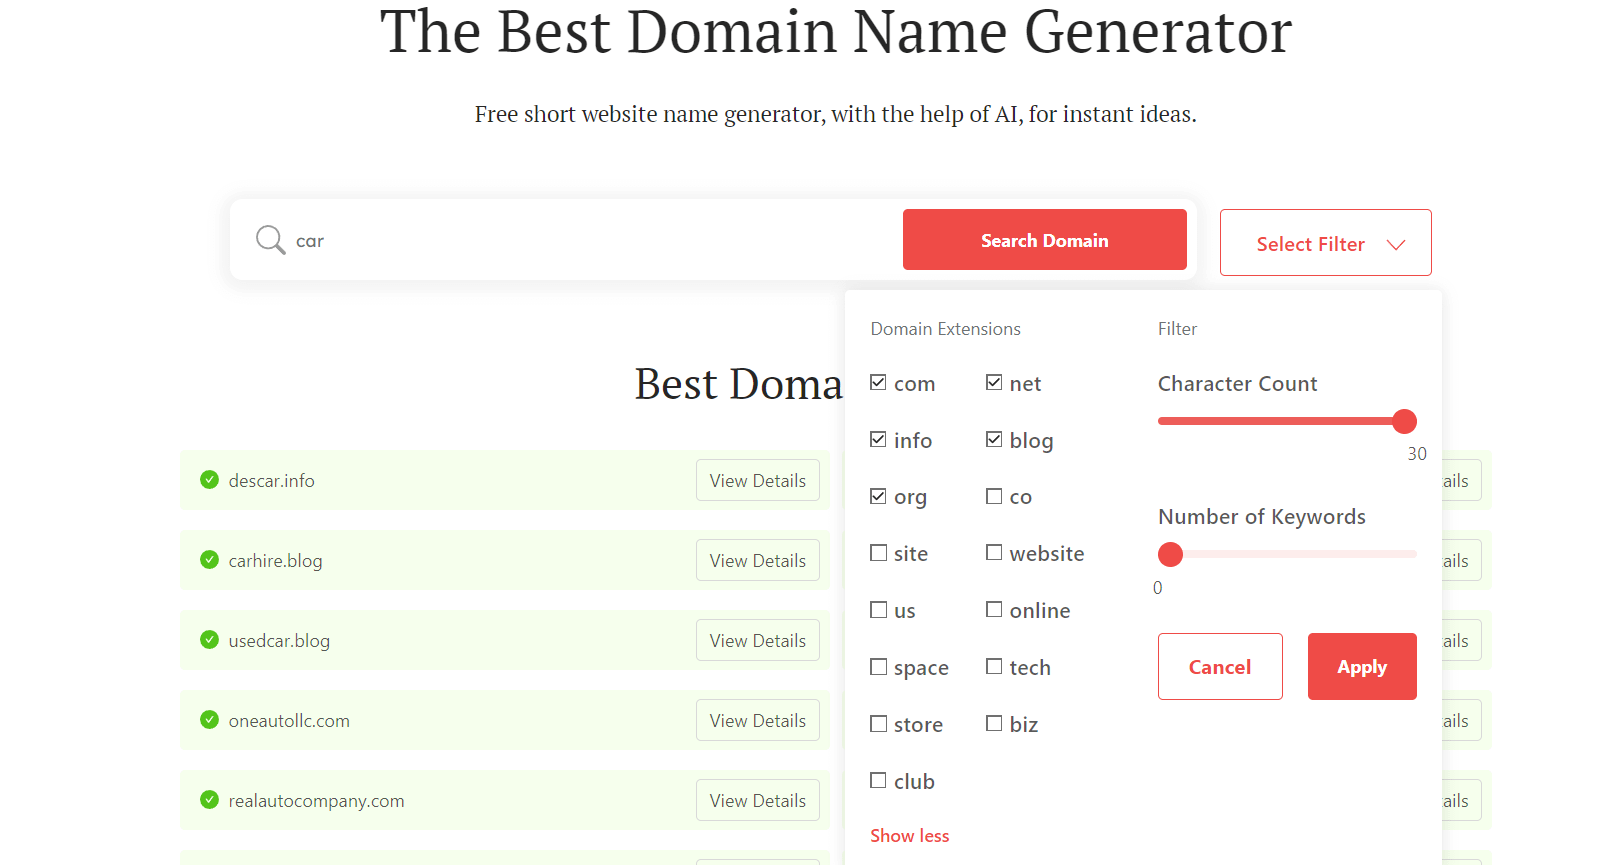 DomainWheel car dealership names generator search filters for domain extensions, character count, and number of keywords